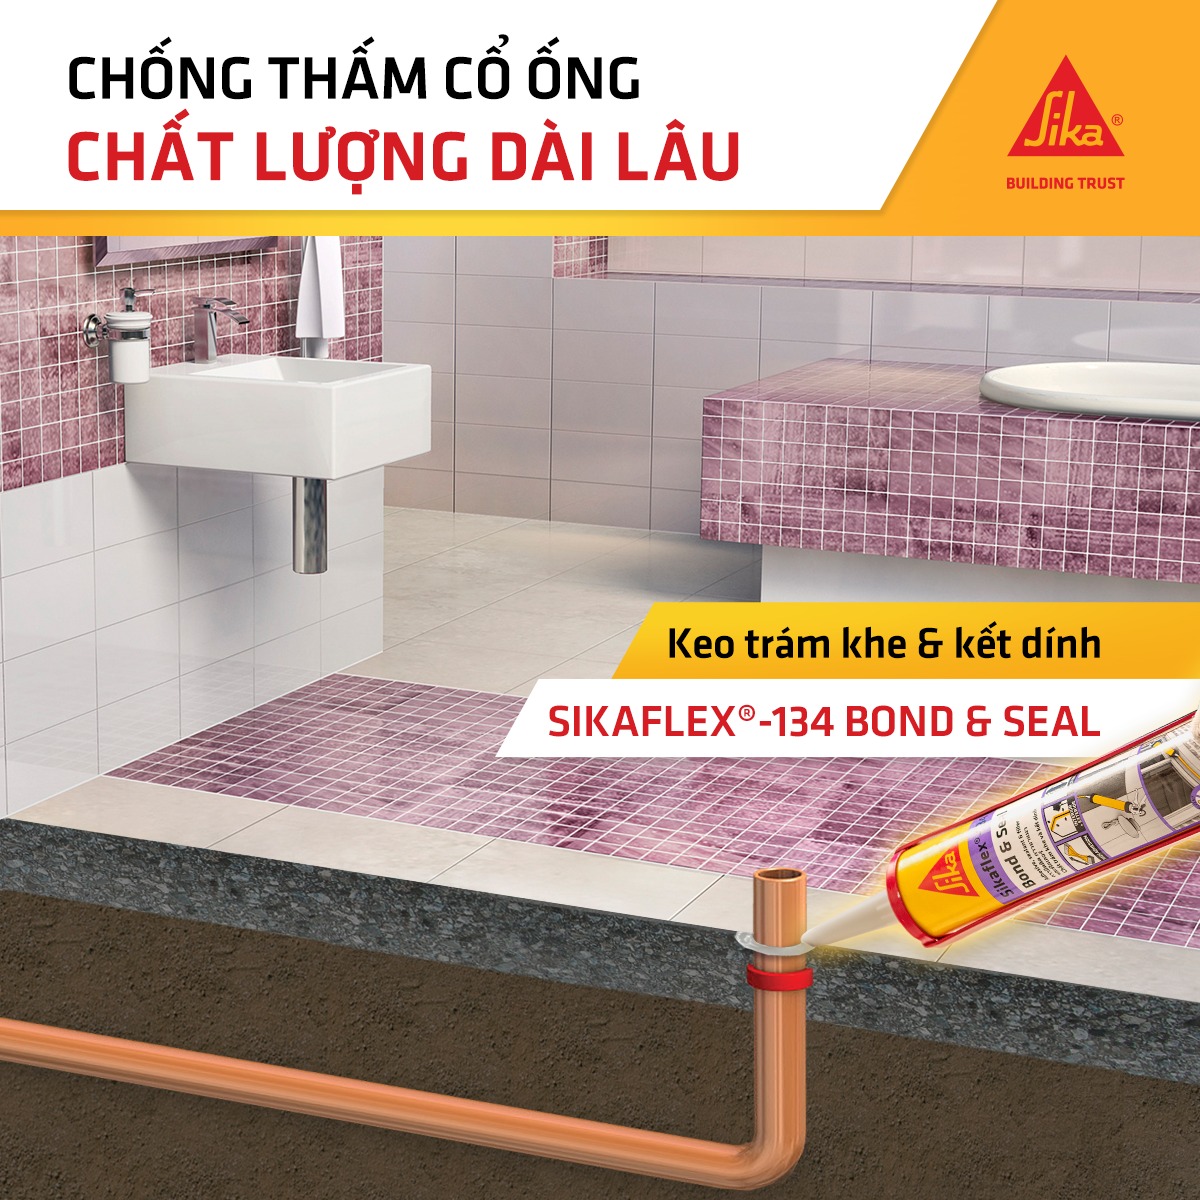 chong tham co ong chat luong sikaflex 134